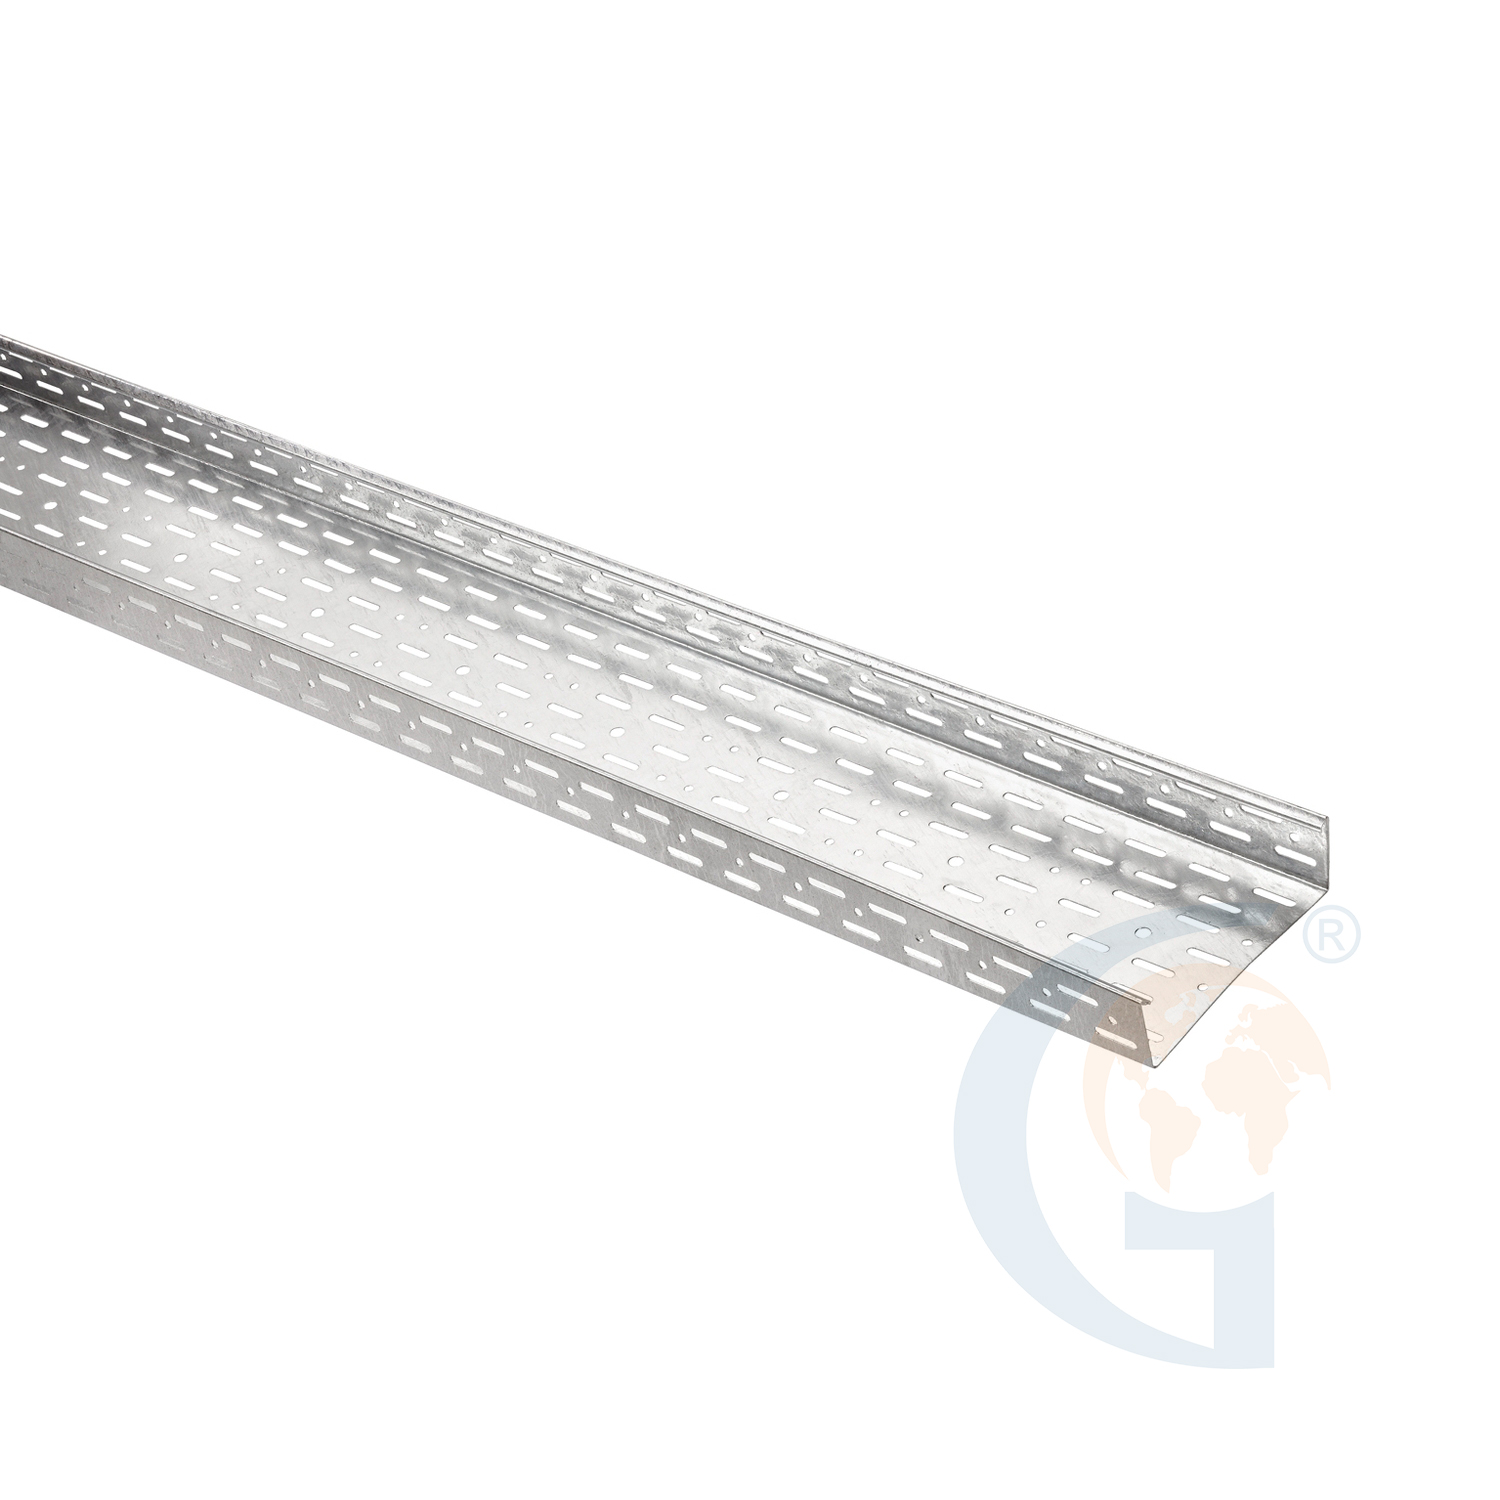 Schneider Electric CSU86016004 Stago – perfored cable tray ZM W=600,H=60,T=1 https://gesrepair.com/wp-content/uploads/2020/Schneider/Schneider_Electric_CSU86016004_.jpg